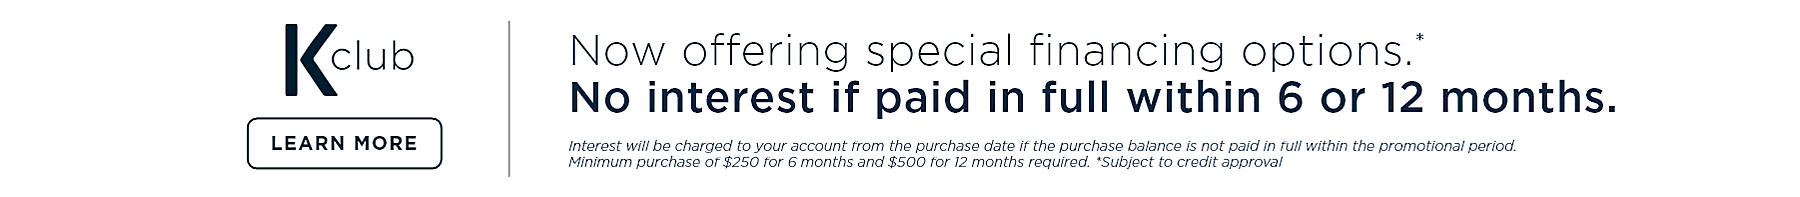 K-club Now offering special financing options.* No interest if paid in full within 6 or 12 months. Interest will be charged to your account from the purchase 071921 if the purchase balance is not paid in full within the promotional period. Minimum purchase of $250 for 6 months and $500 for 12 months required. *Subject to credit approval. Learn more